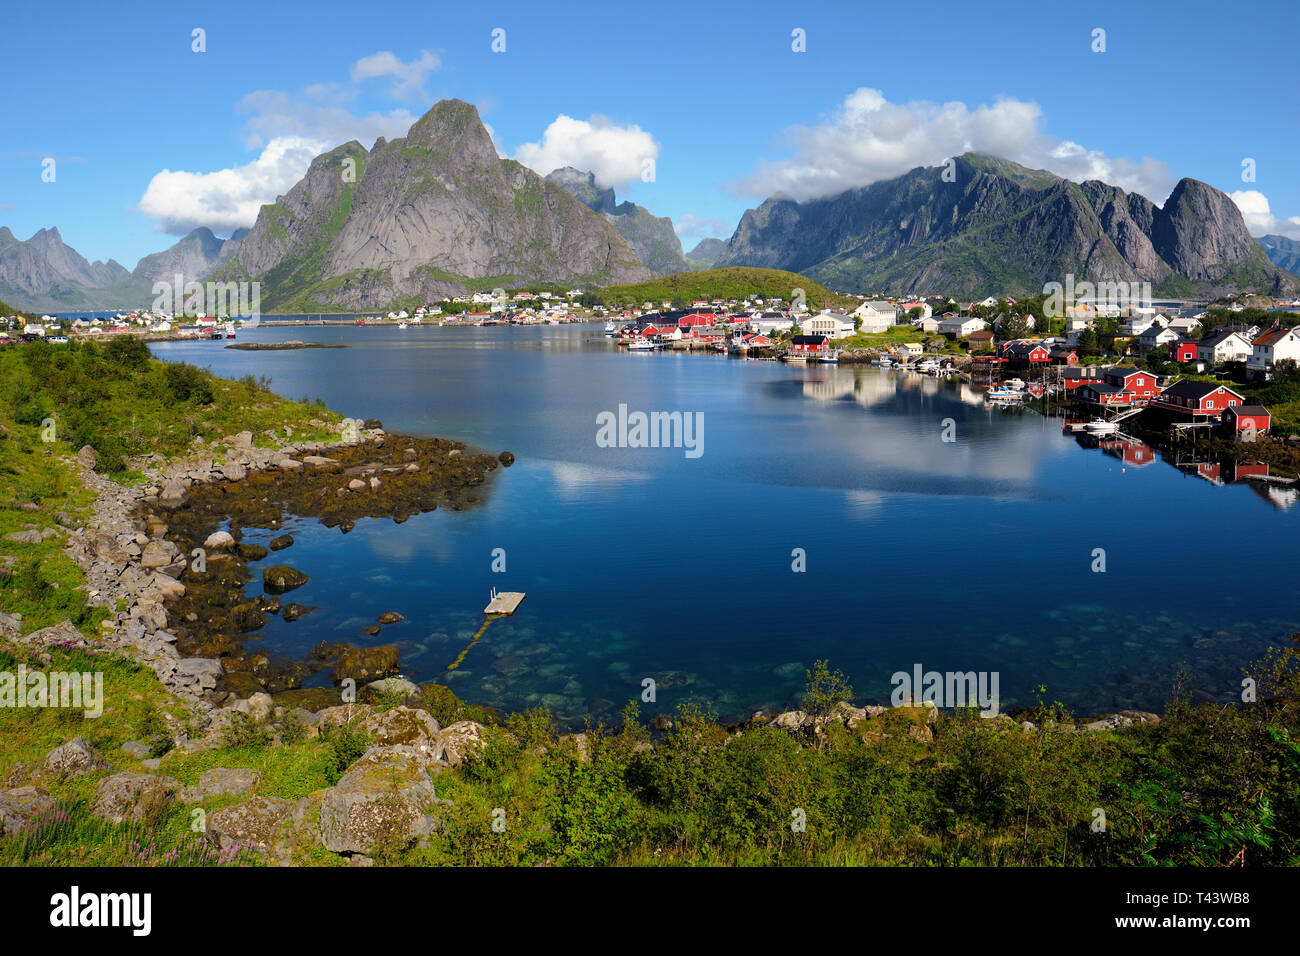 The Fishing Village And Mountain Landscape Of Reine On The Island Of